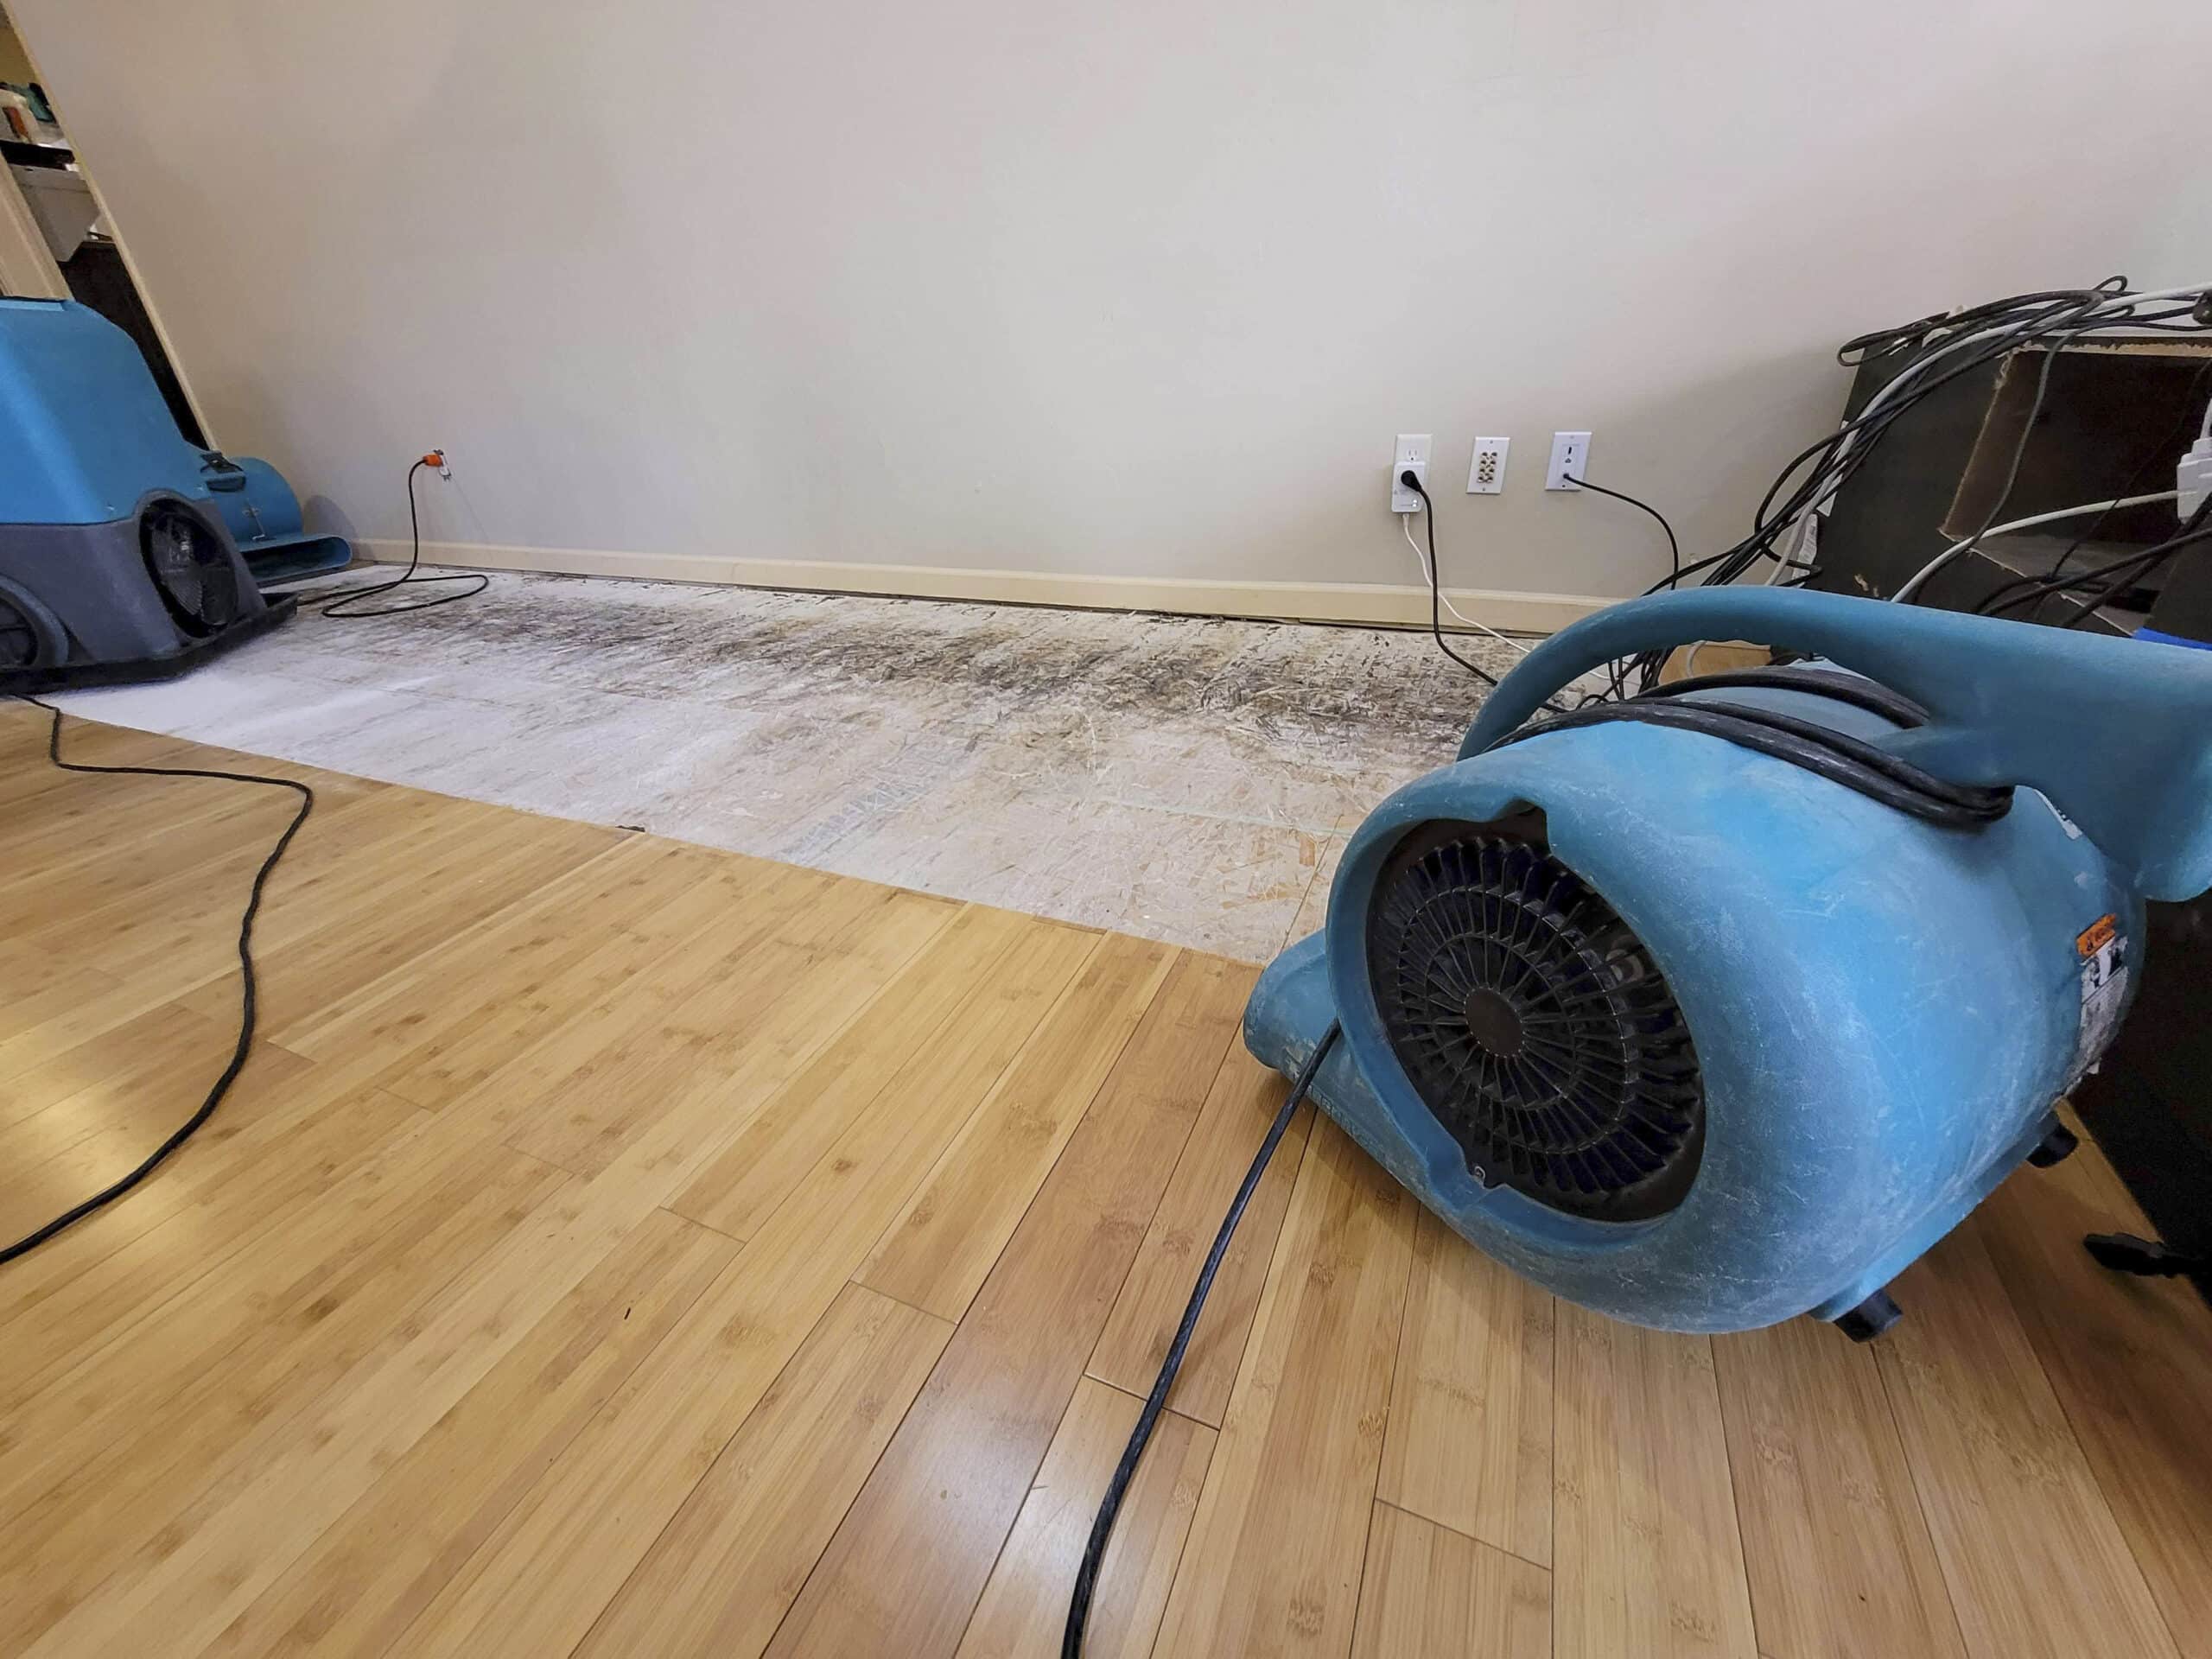  Drying and Dehumidification in Water Damage Restoration